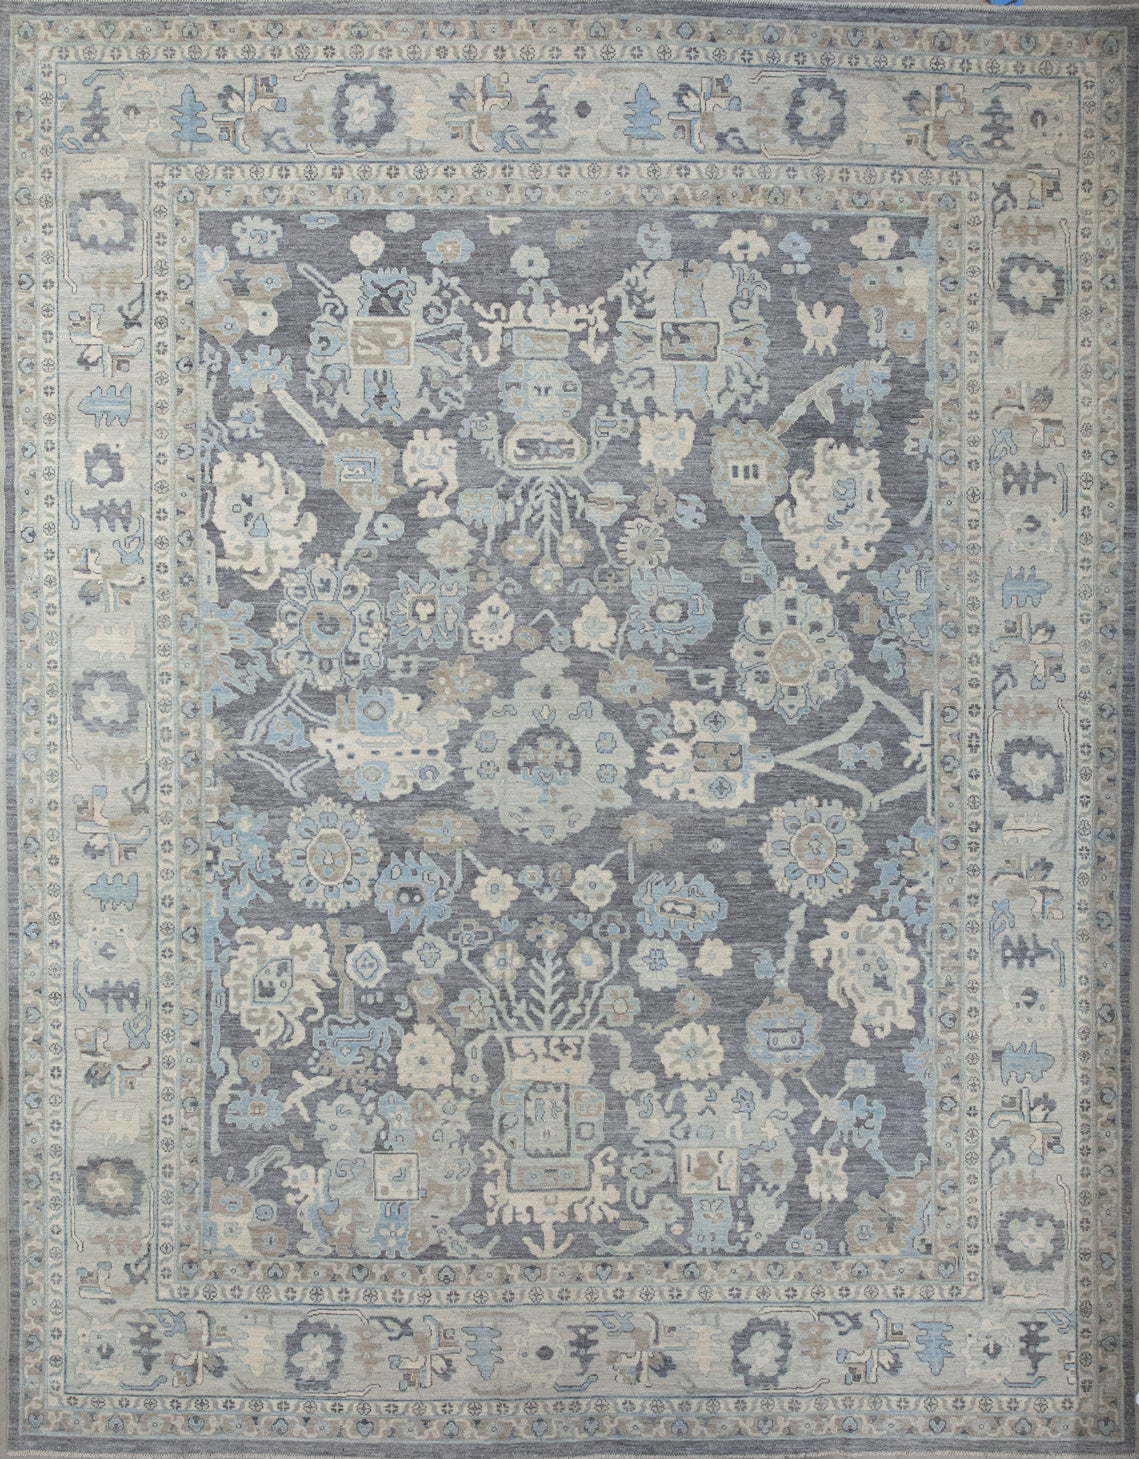 Finest rug comes with an elegant color scheme which has brown, beige, and light blue. The design renders abstract flowers, branches, and corals.